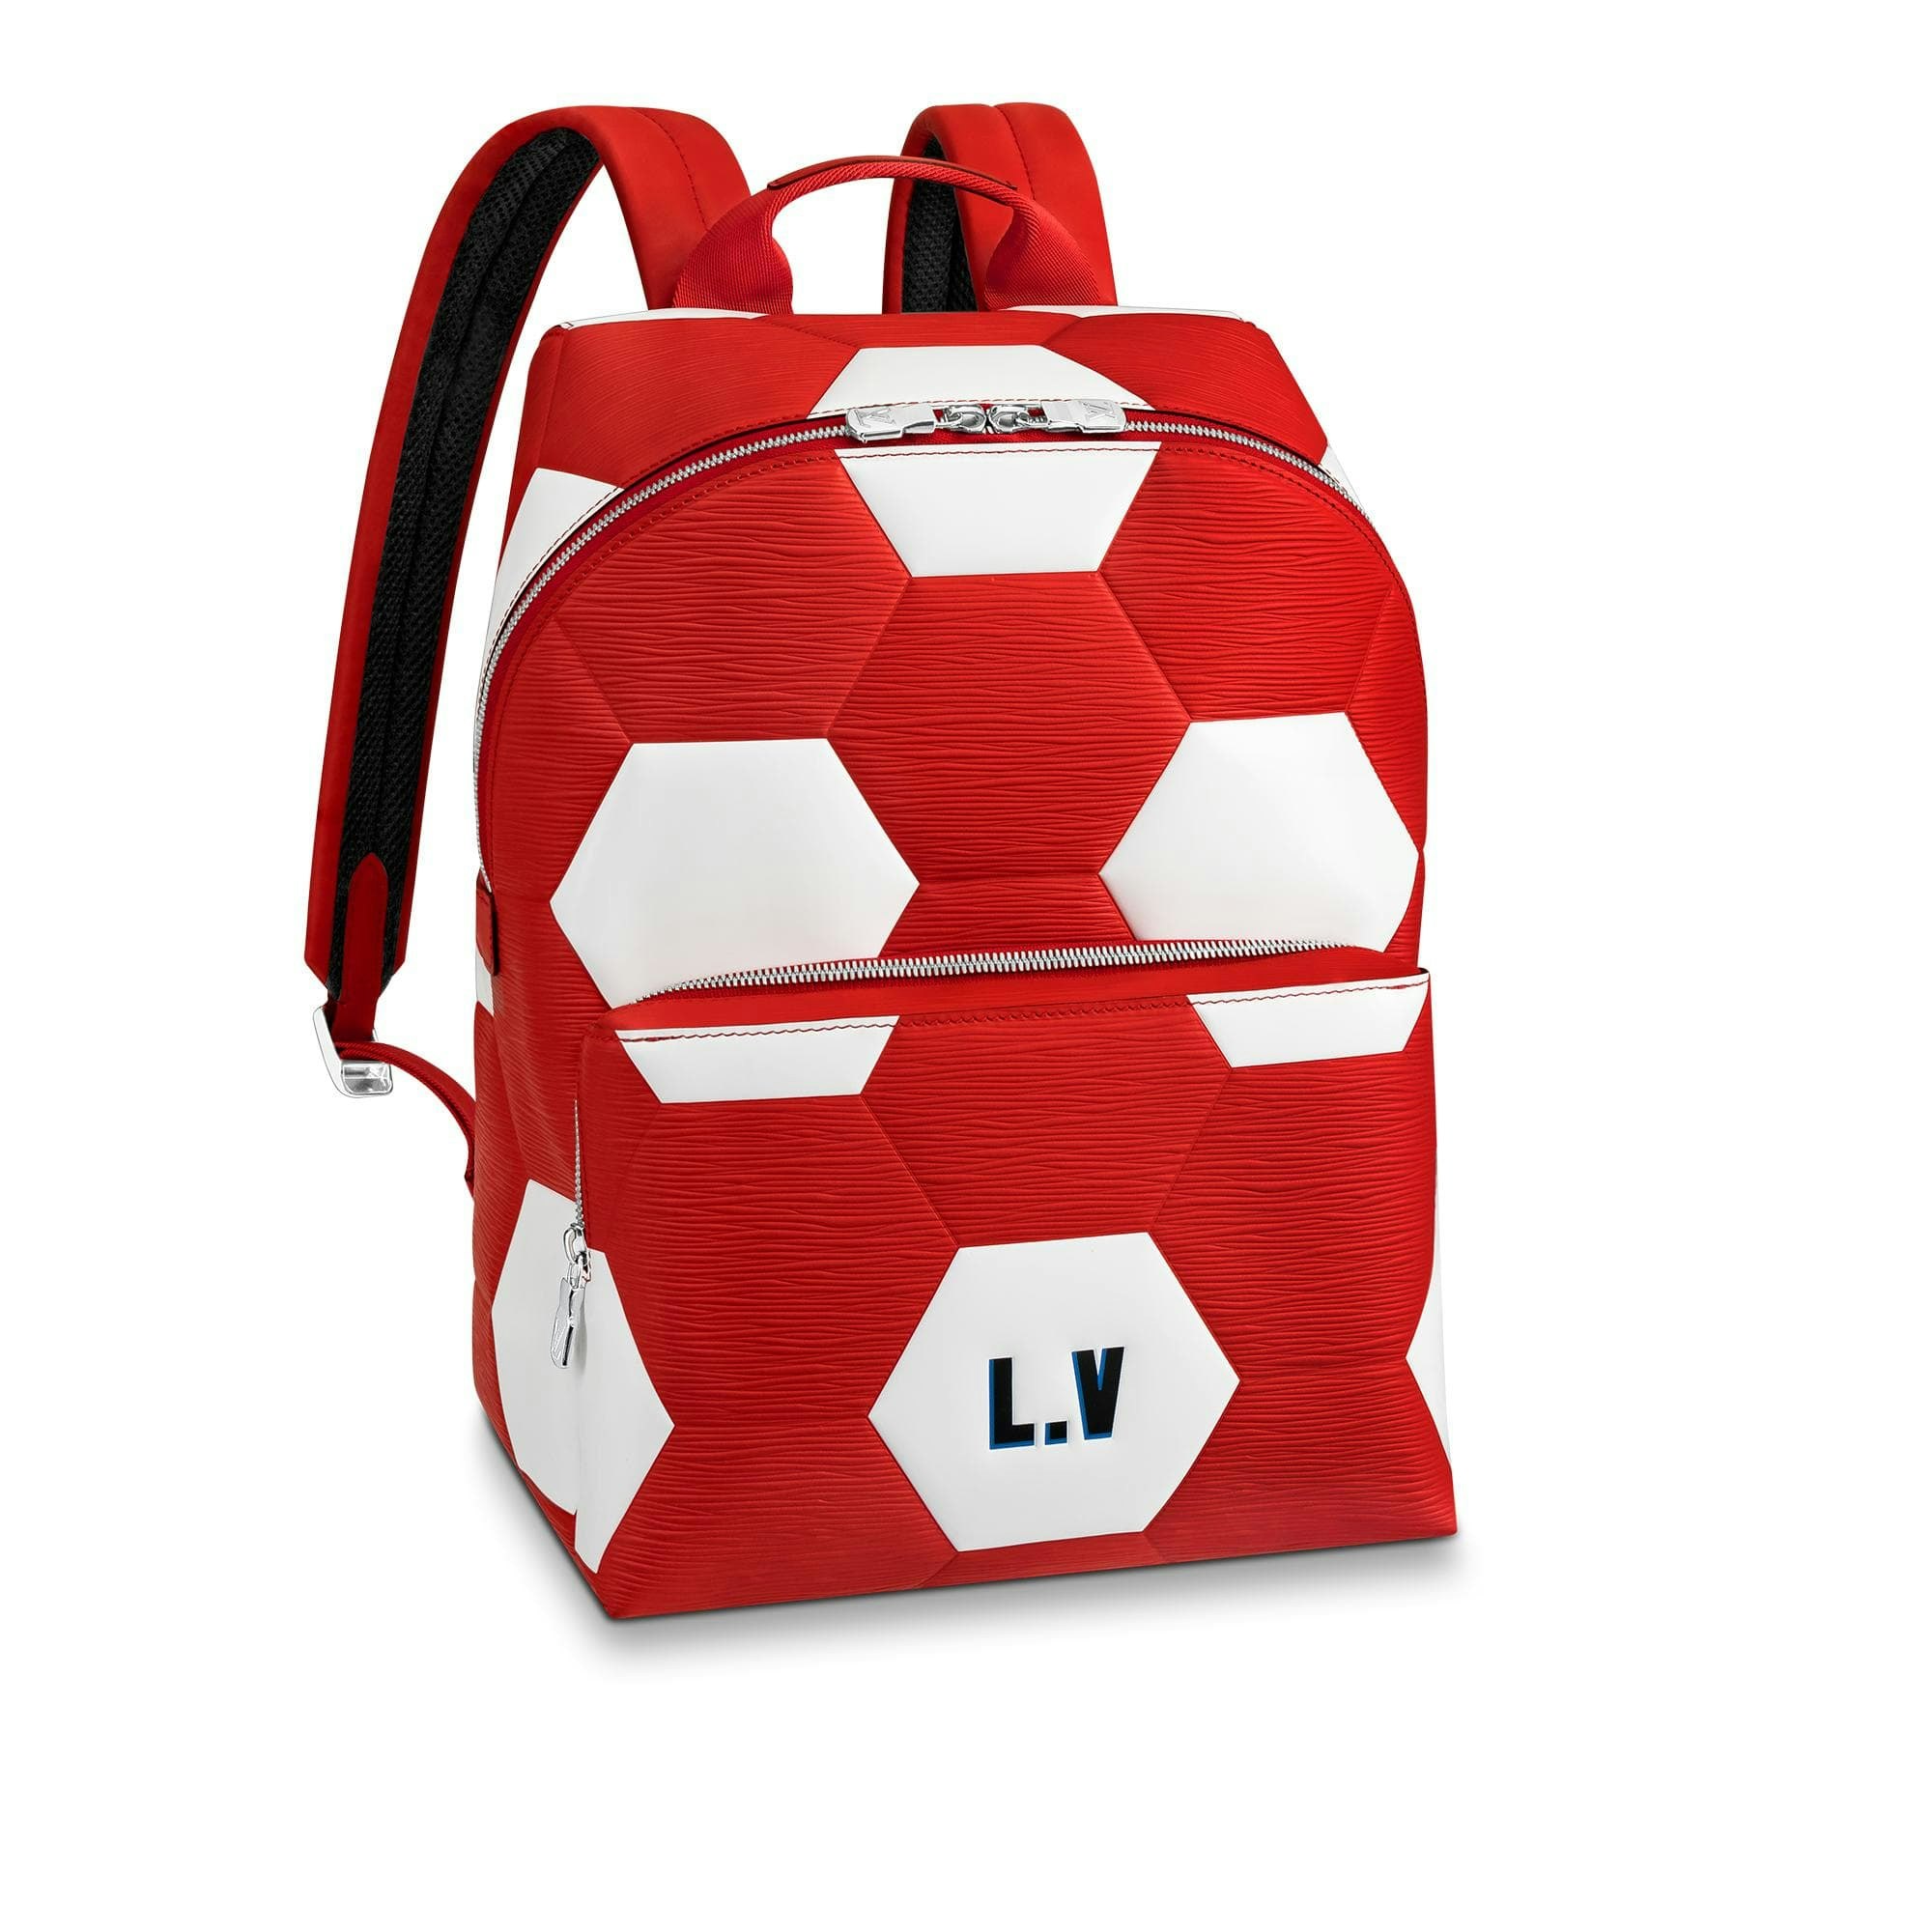 FIFA Essentials Daily Duffle Bag - Official FIFA Store